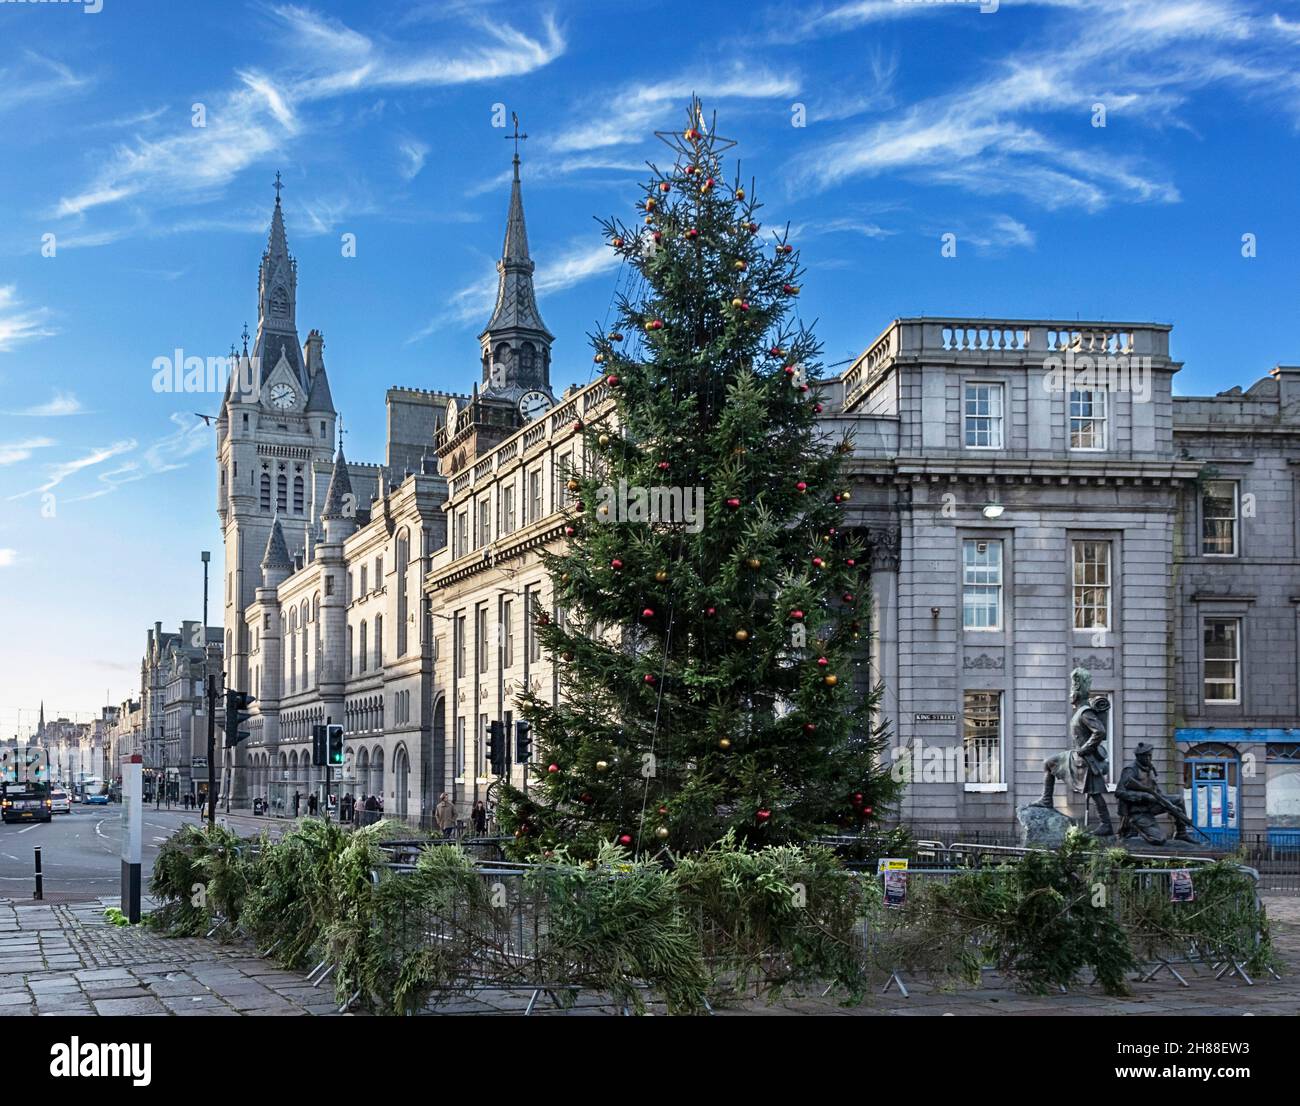 ABERDEEN CITY SCOTLAND UNION STREET THE TOWN HOUSE AND A DECORATED CHRISTMAS FIR TREE Stock Photo